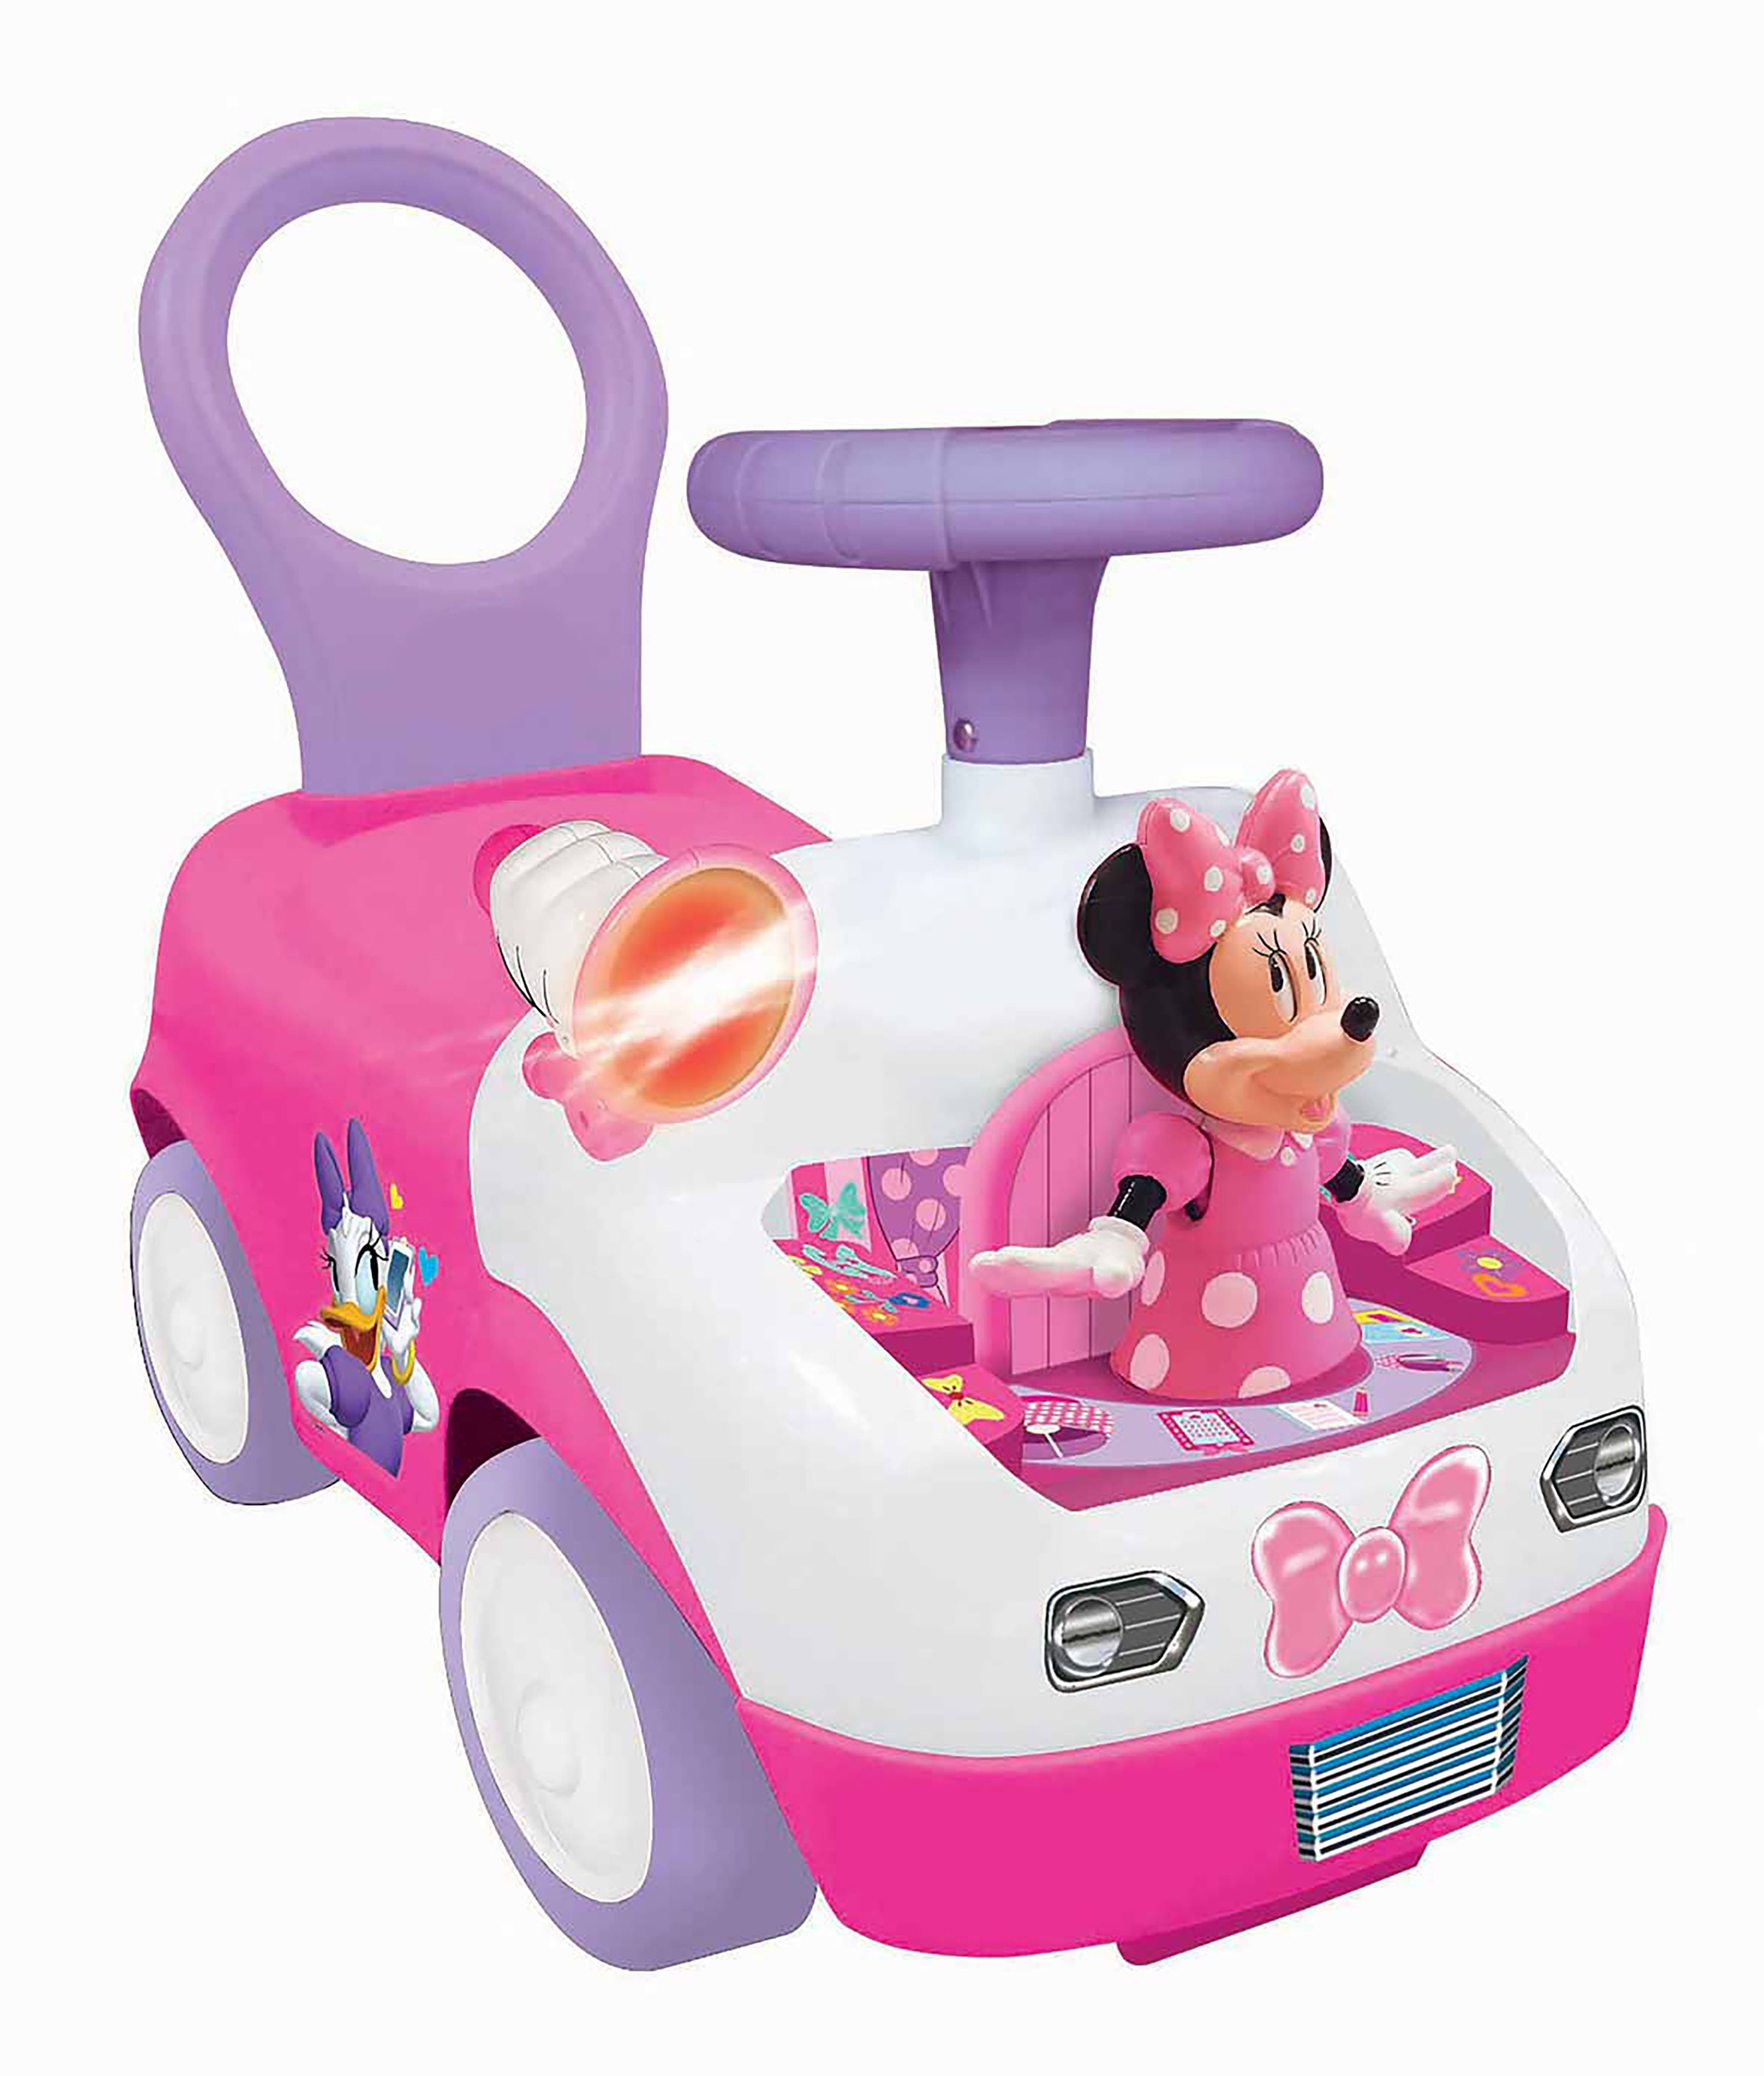 Minnie Mouse Ride On Little Car With Music Horn Toys For 2 3 4 5 Year Old Girls 